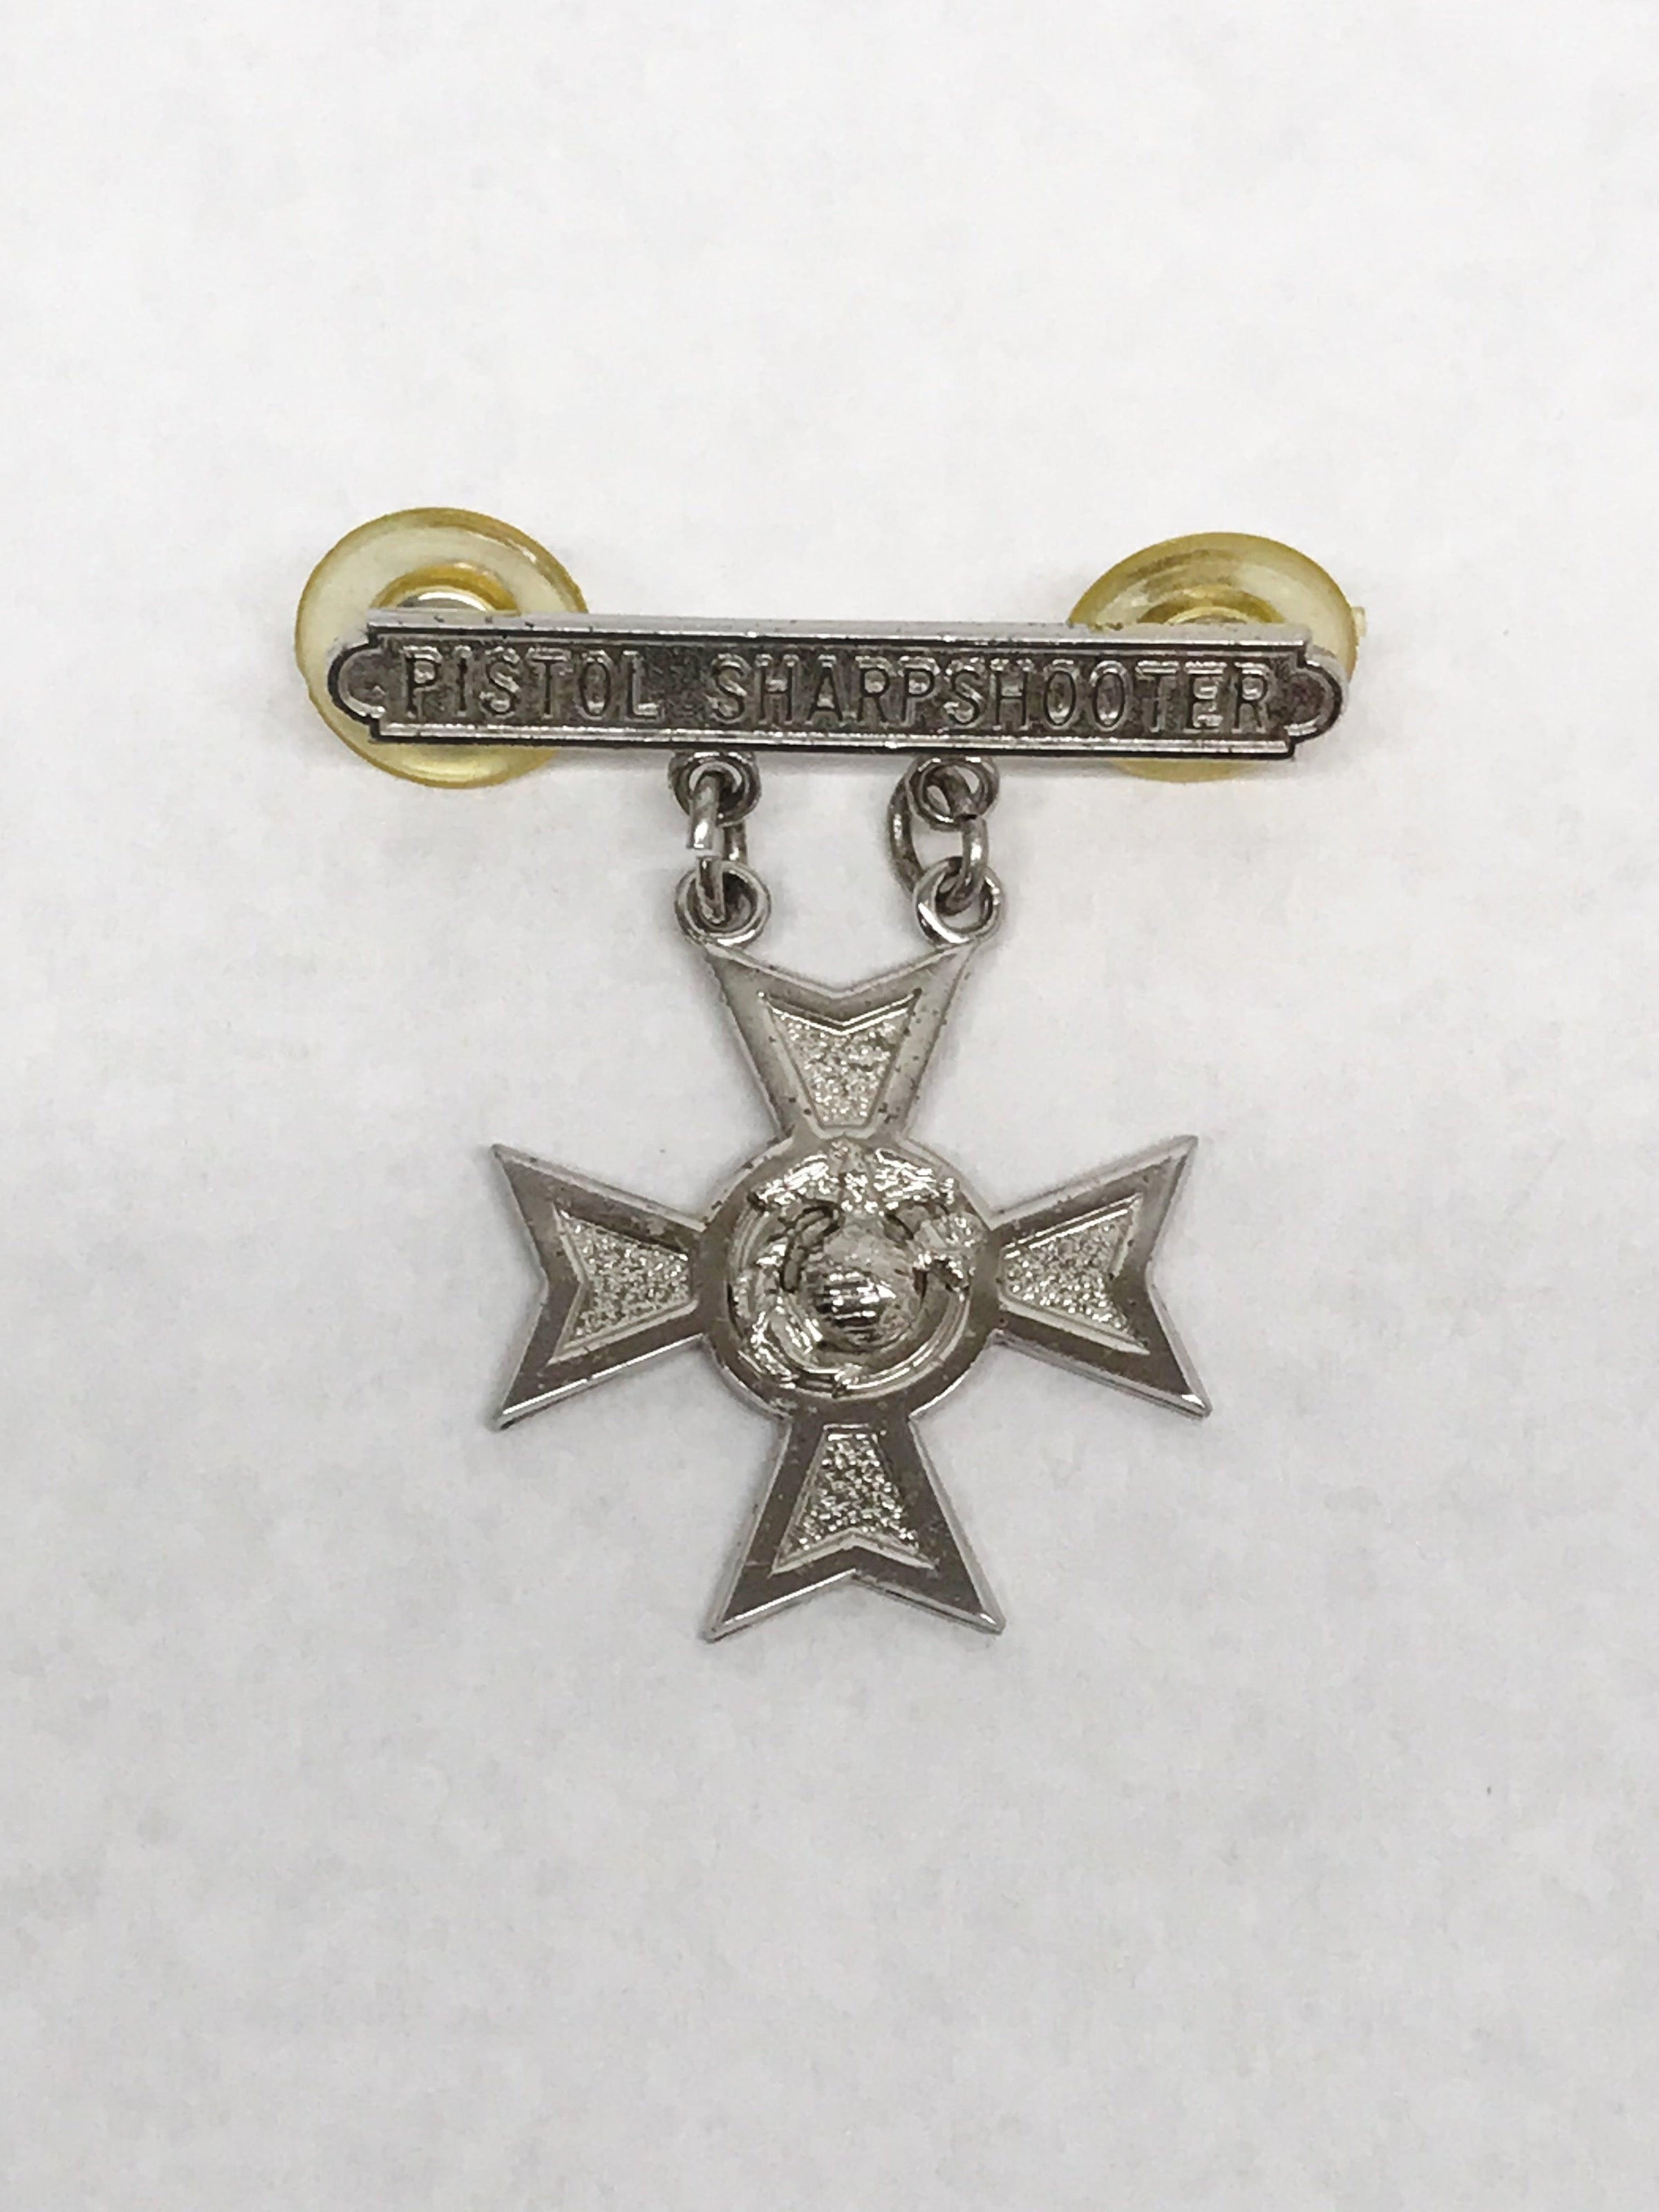 United States Marine Corps Sterling Silver Pistol Sharpshooter Badge Pin - Hers and His Treasures